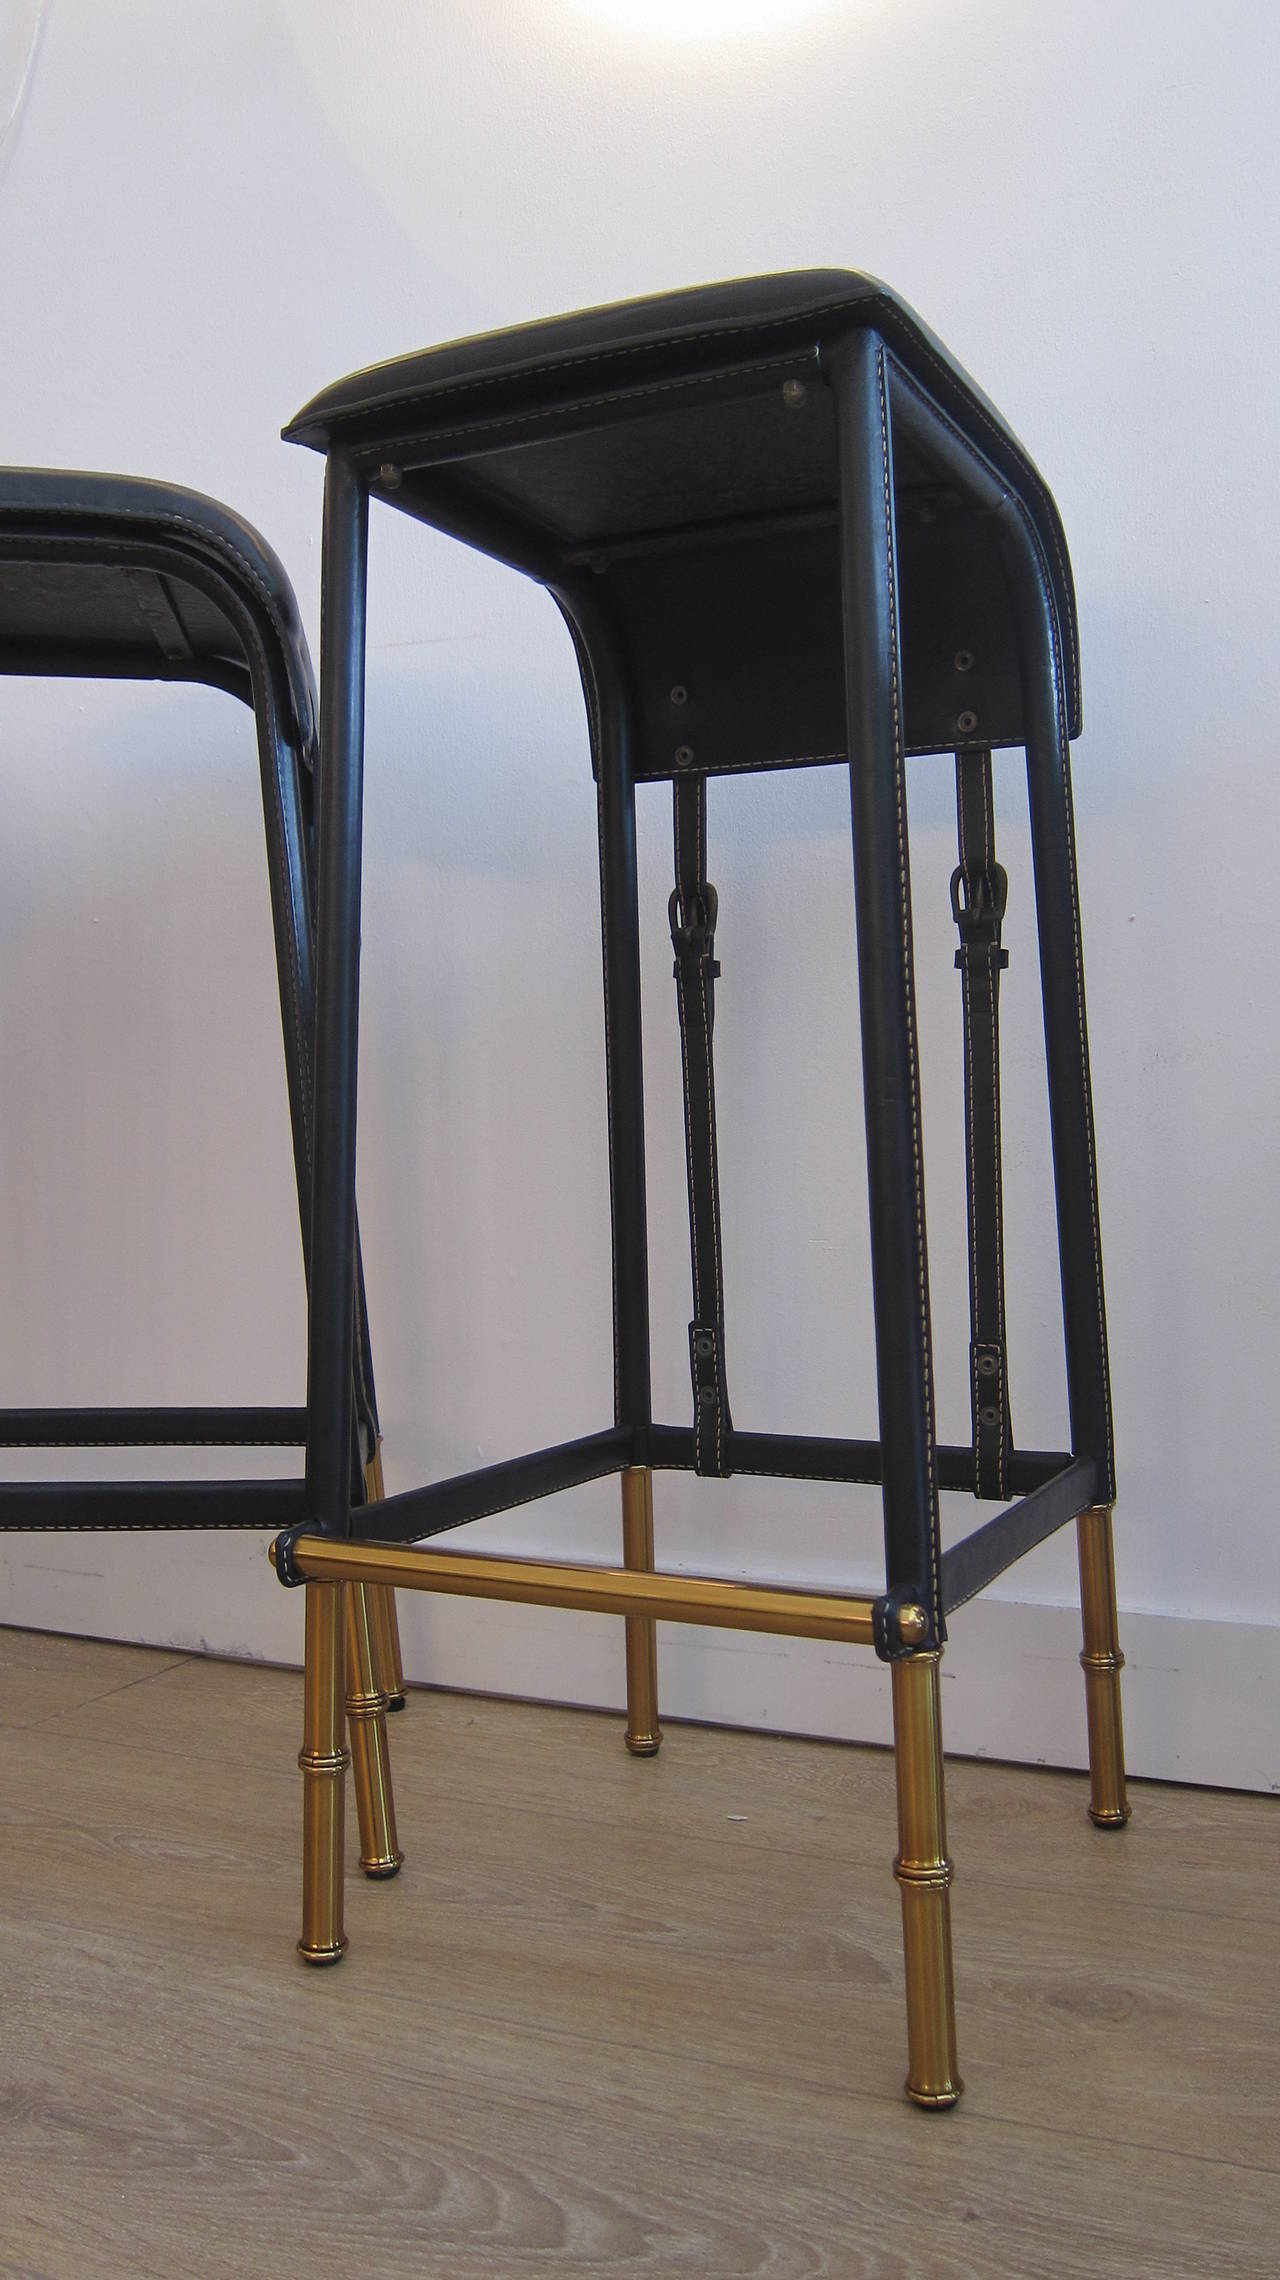 A pair of black stitched leather, saddle bar stools by Jacques Adnet. Brass faux bamboo legs. Four available.